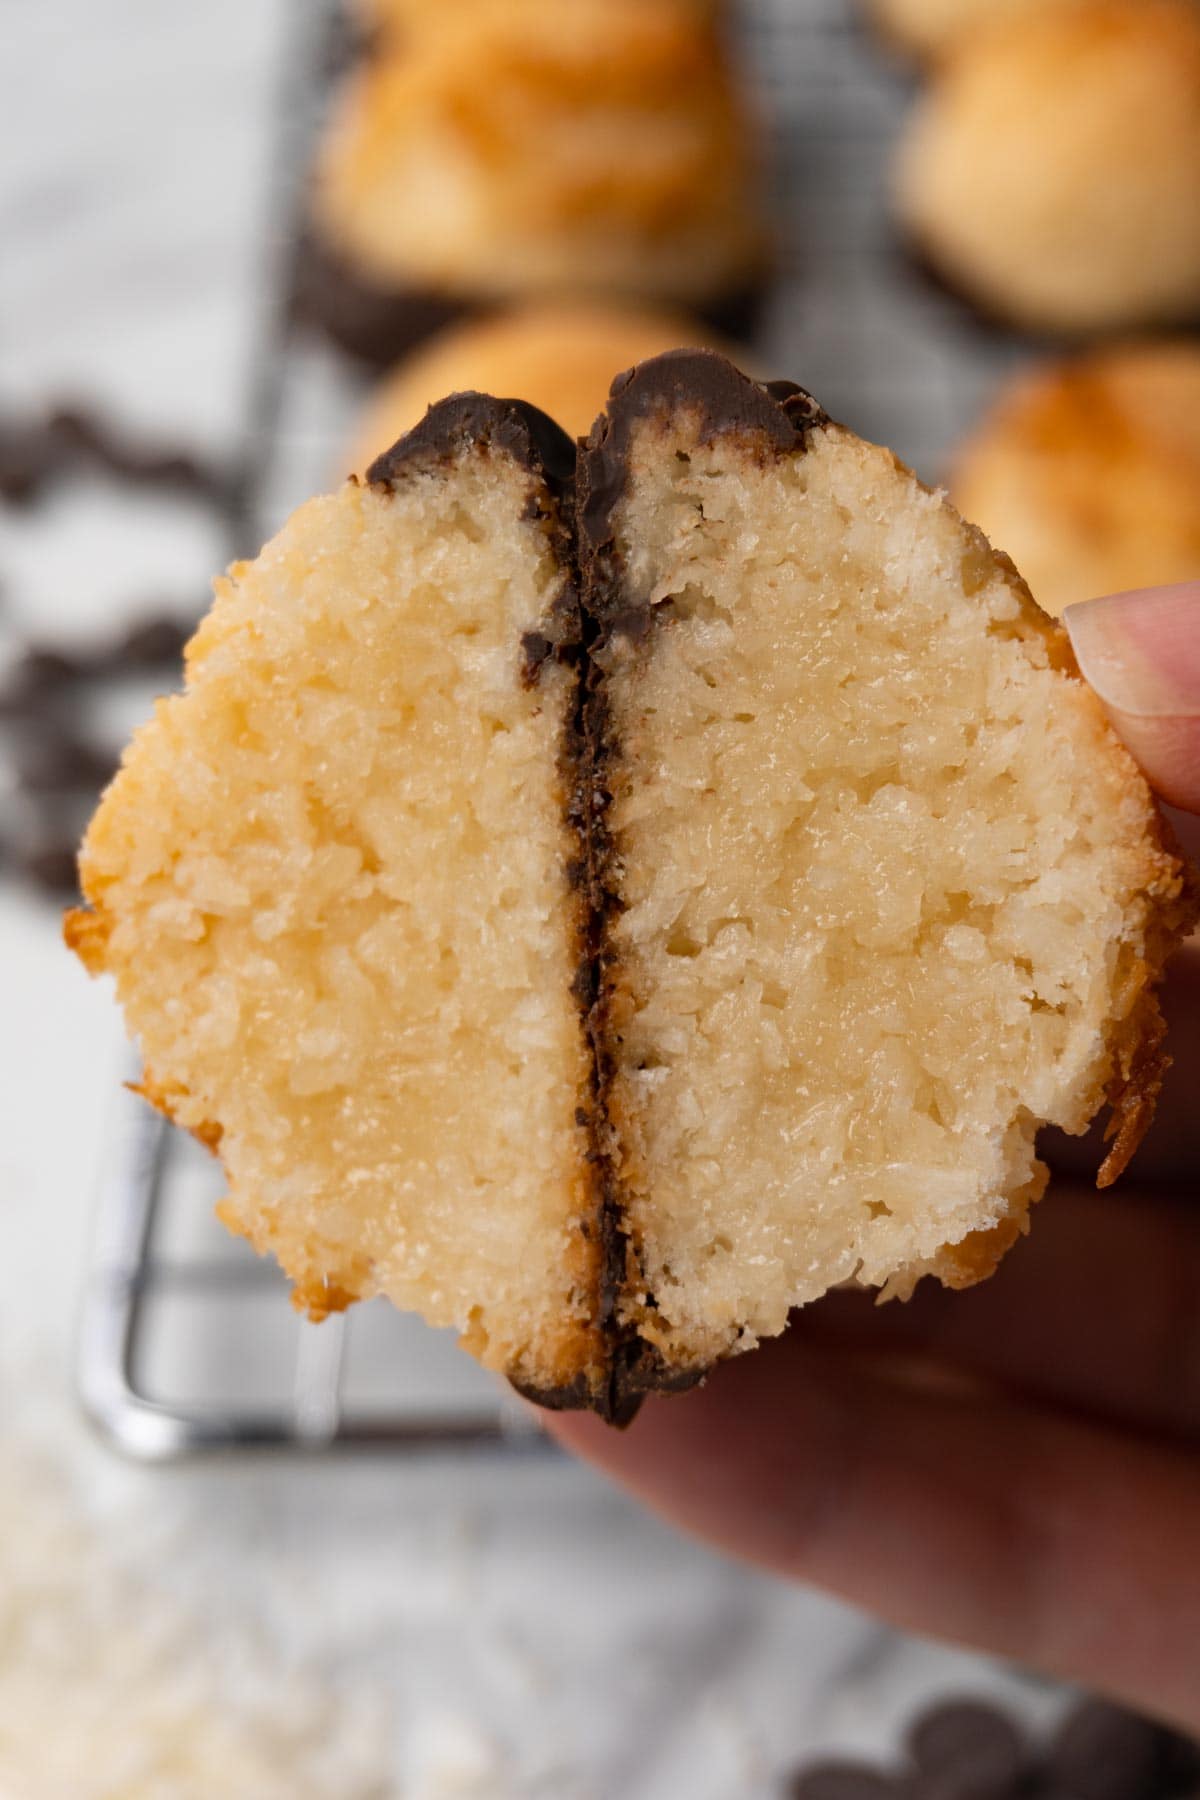 A hand is holding a cut-in-half cookie made of coconut flakes dipped in chocolate.